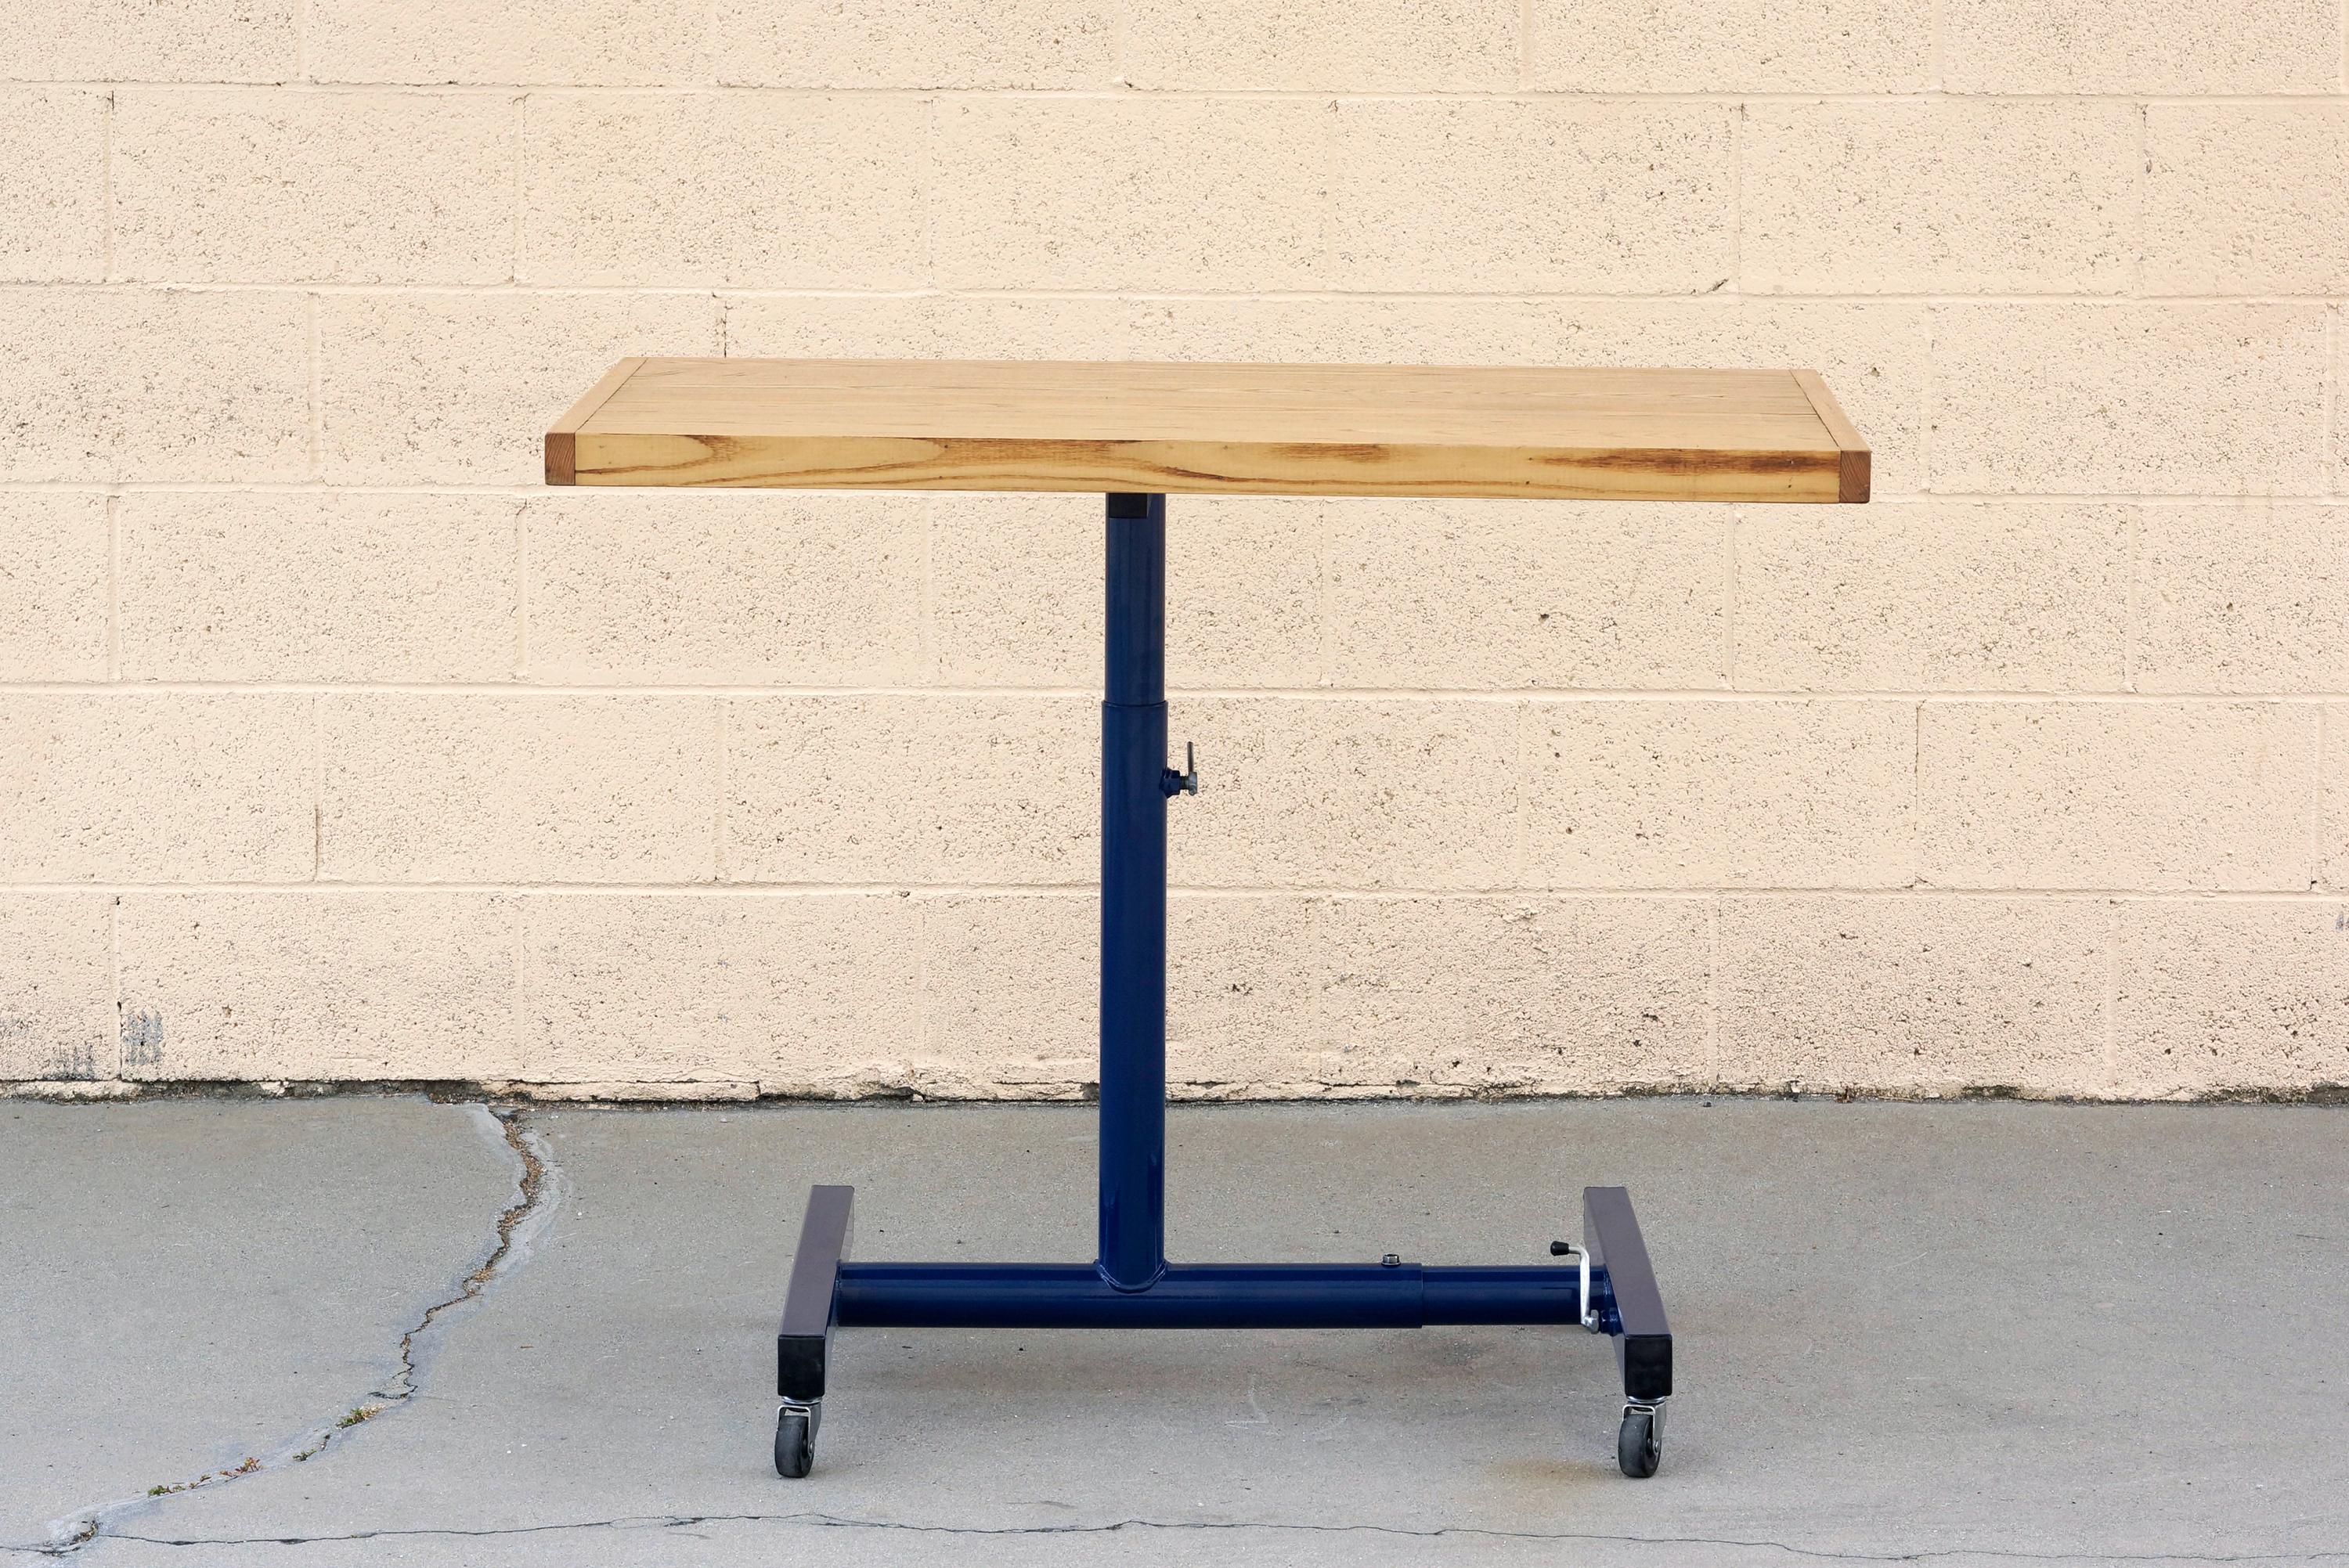 Modular and adjustable, our vintage standing desk is ready to transform the way you work. We refinished the steel base in a midnight blue (BL20) powder coat and paired it with a reclaimed ashwood top. Height adjusts from 25-34